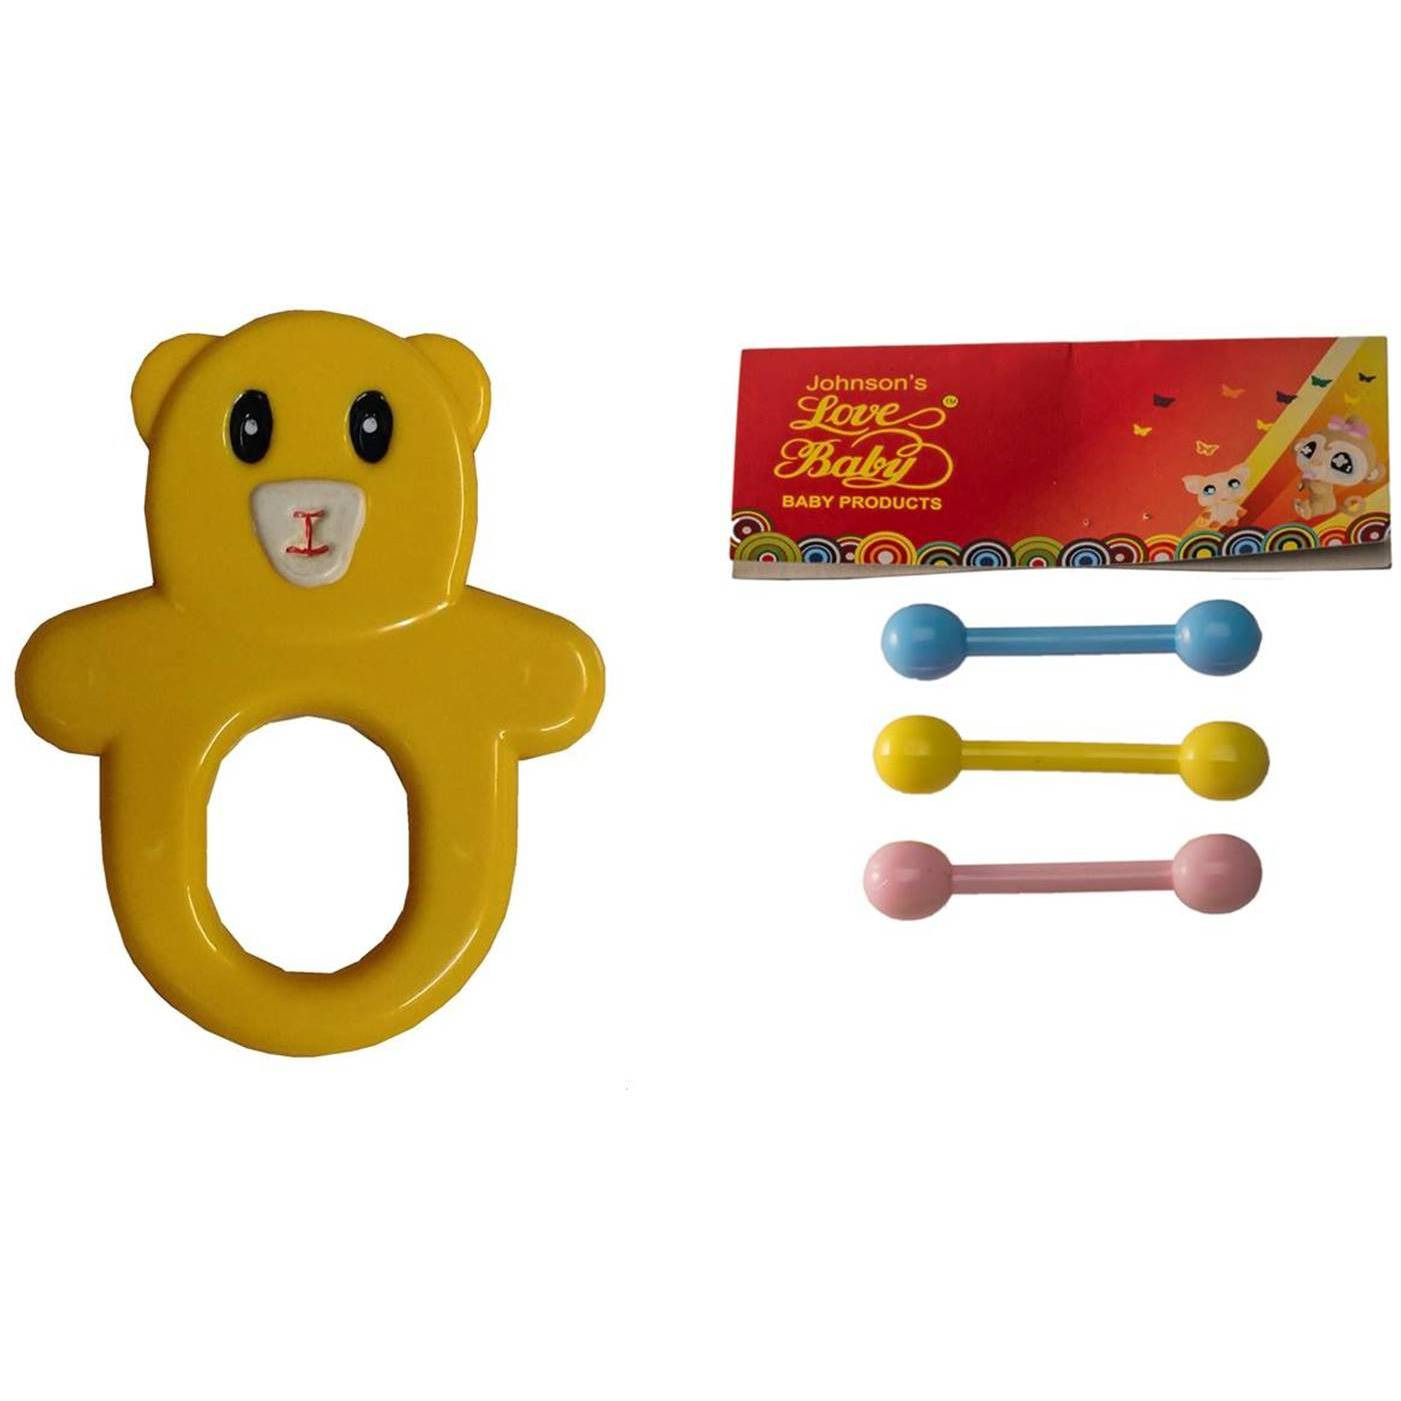 Auto Flow Rattle Toy - Guddu Toy - BT24 Combo Yellow